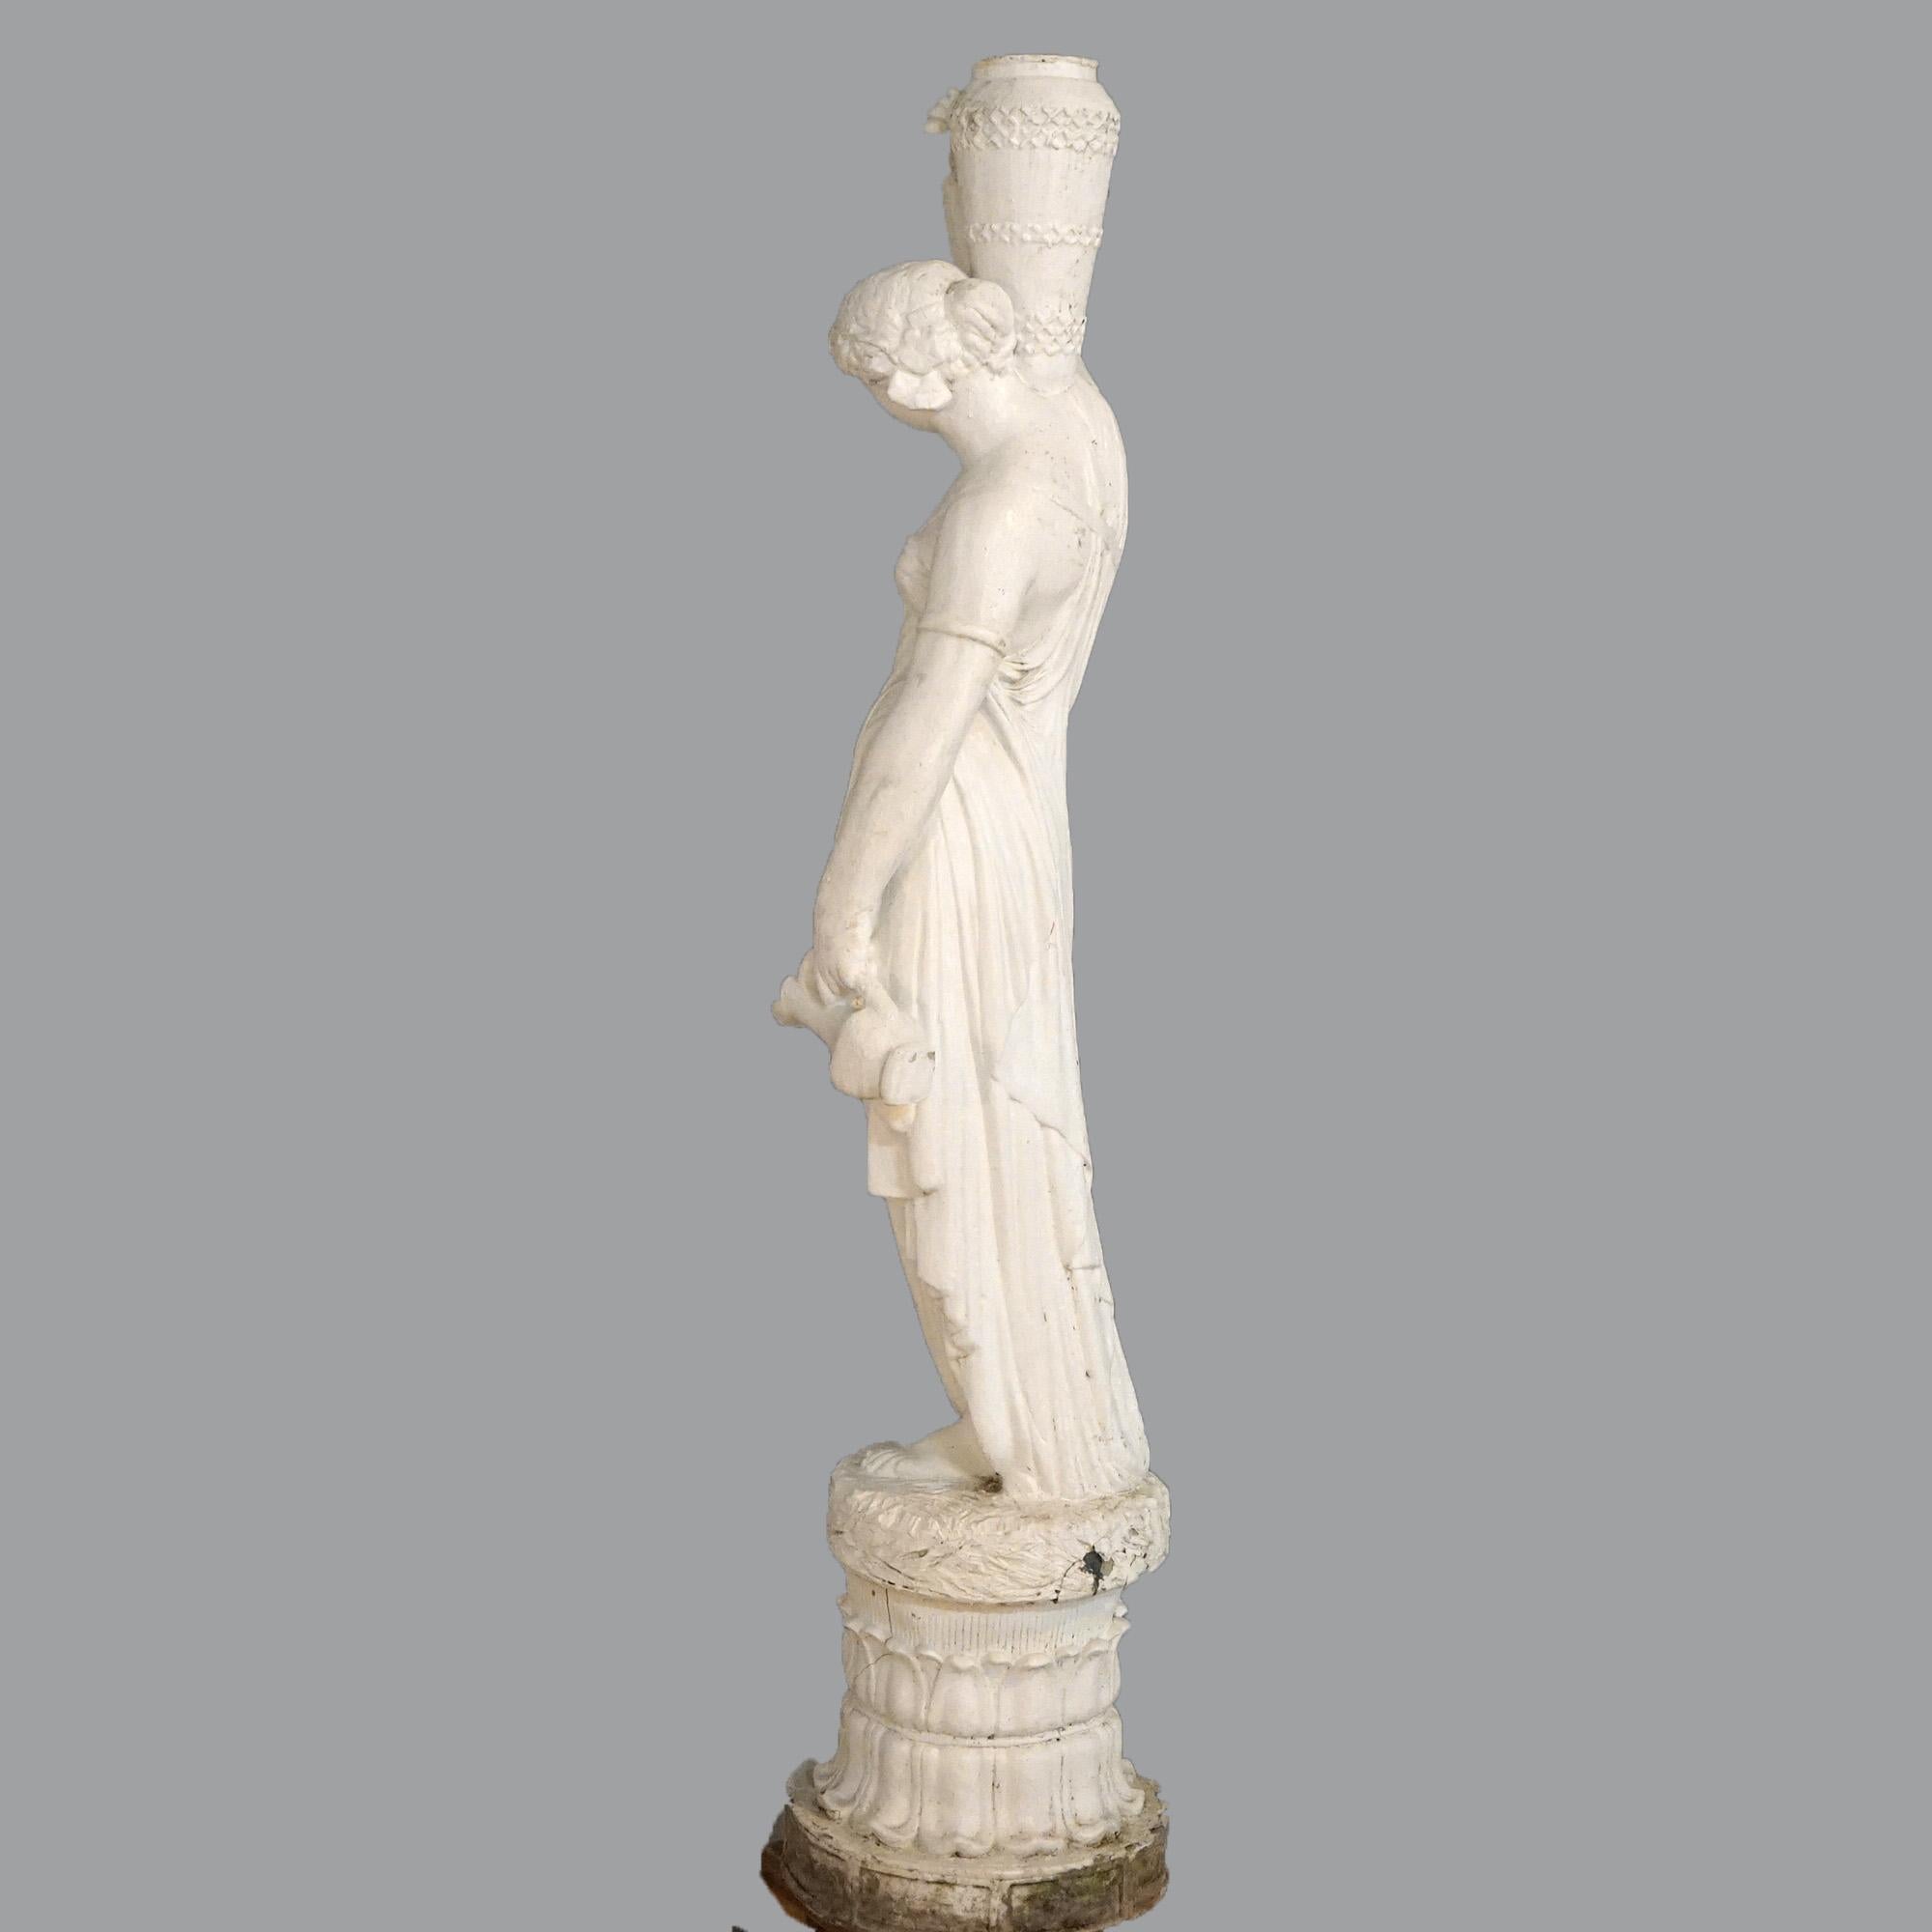 20th Century Antique Classical Cast Hard Stone Figural Fountain, Woman & Water Vessels 20th C